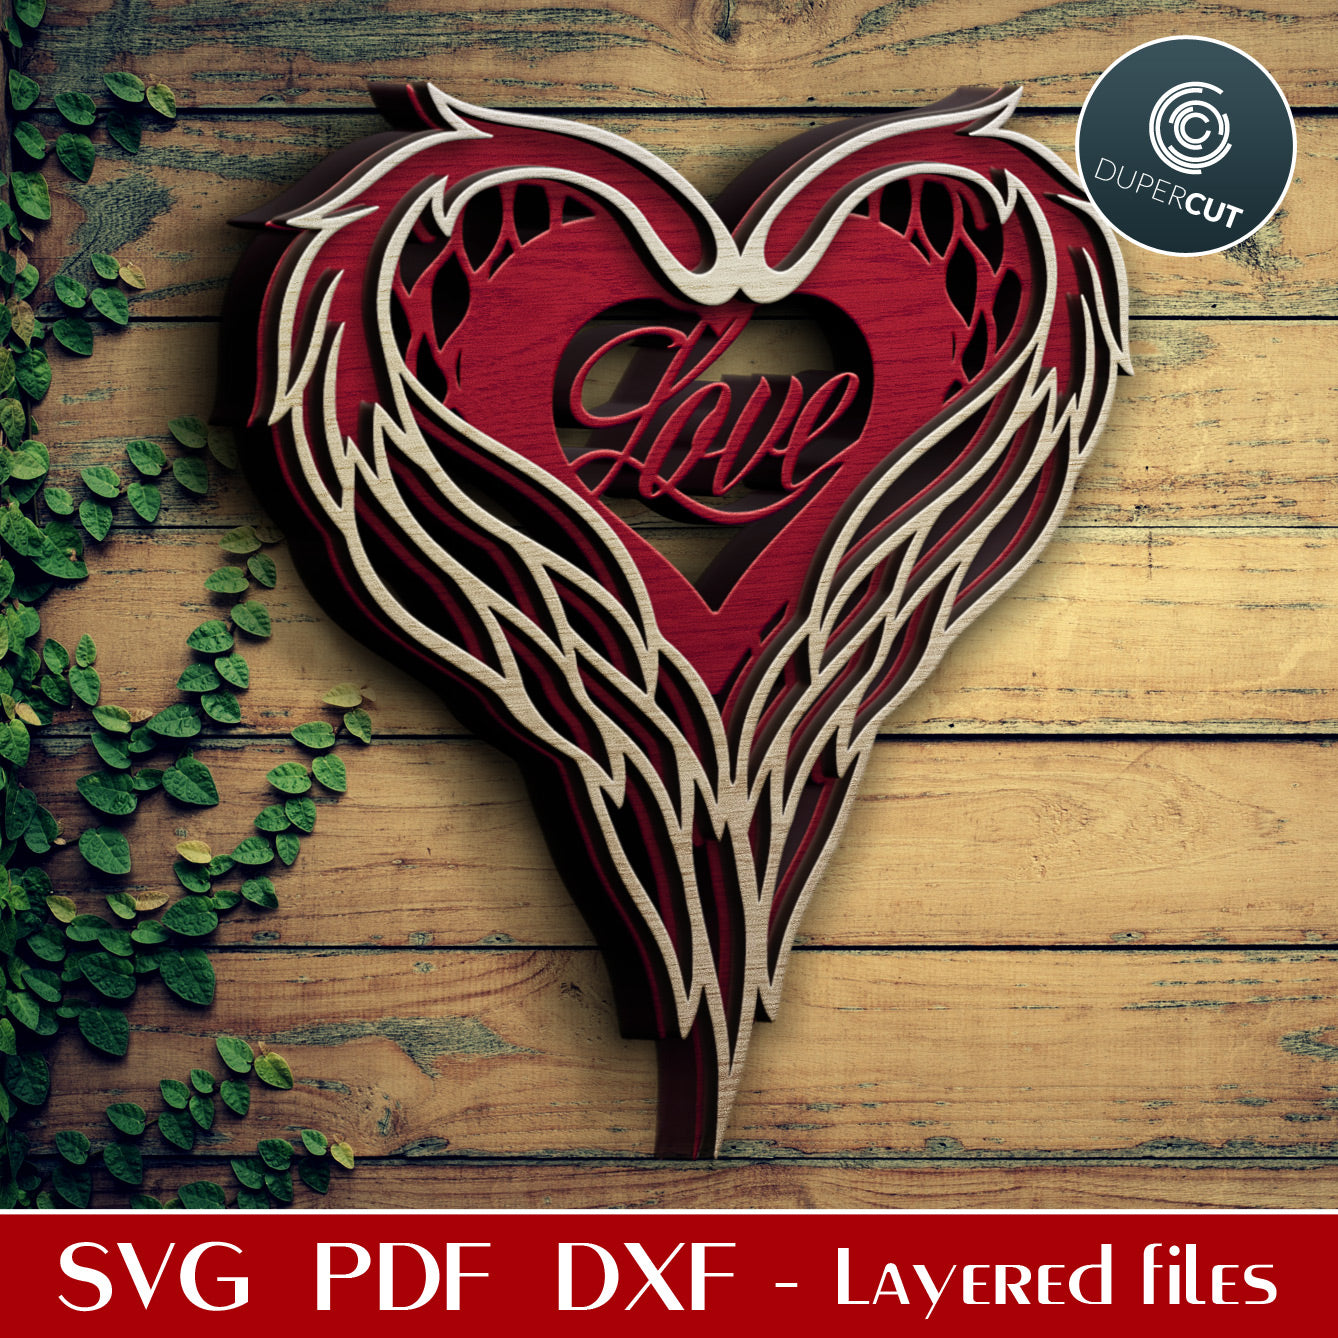 Love heart with wings - Valentines Day layered cutting files SVG PDF DXF vector template for laser machines, Glowforge, Cricut, Silhouette cameo